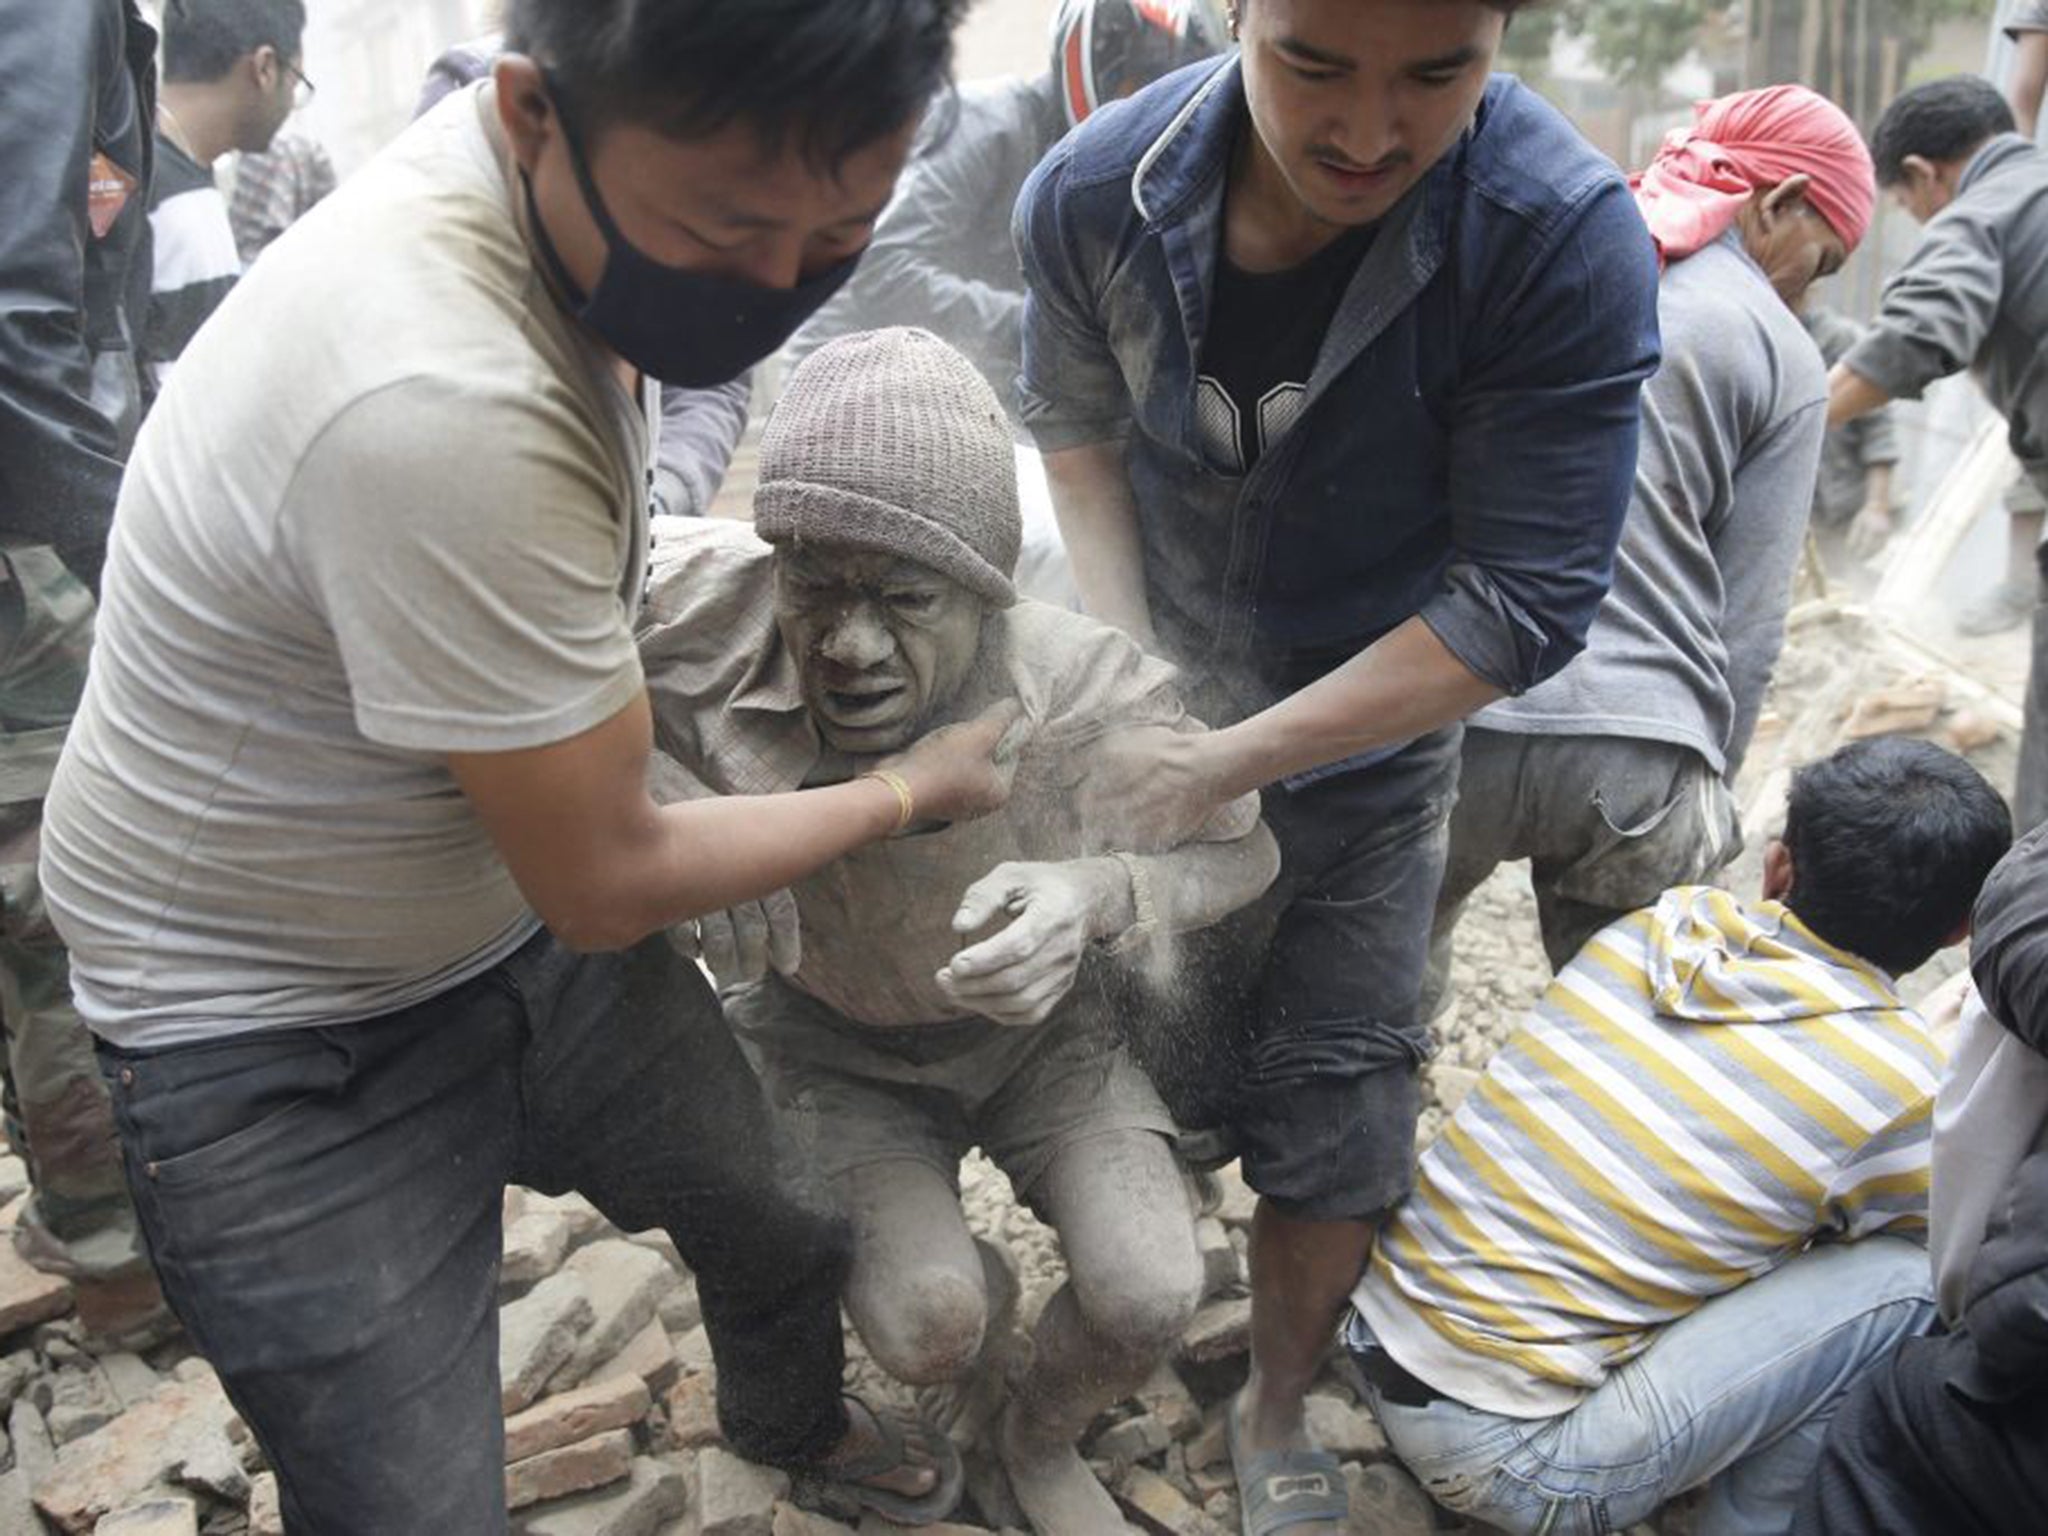 A man is freed from the rubble in the Kathmandu earthquake last year